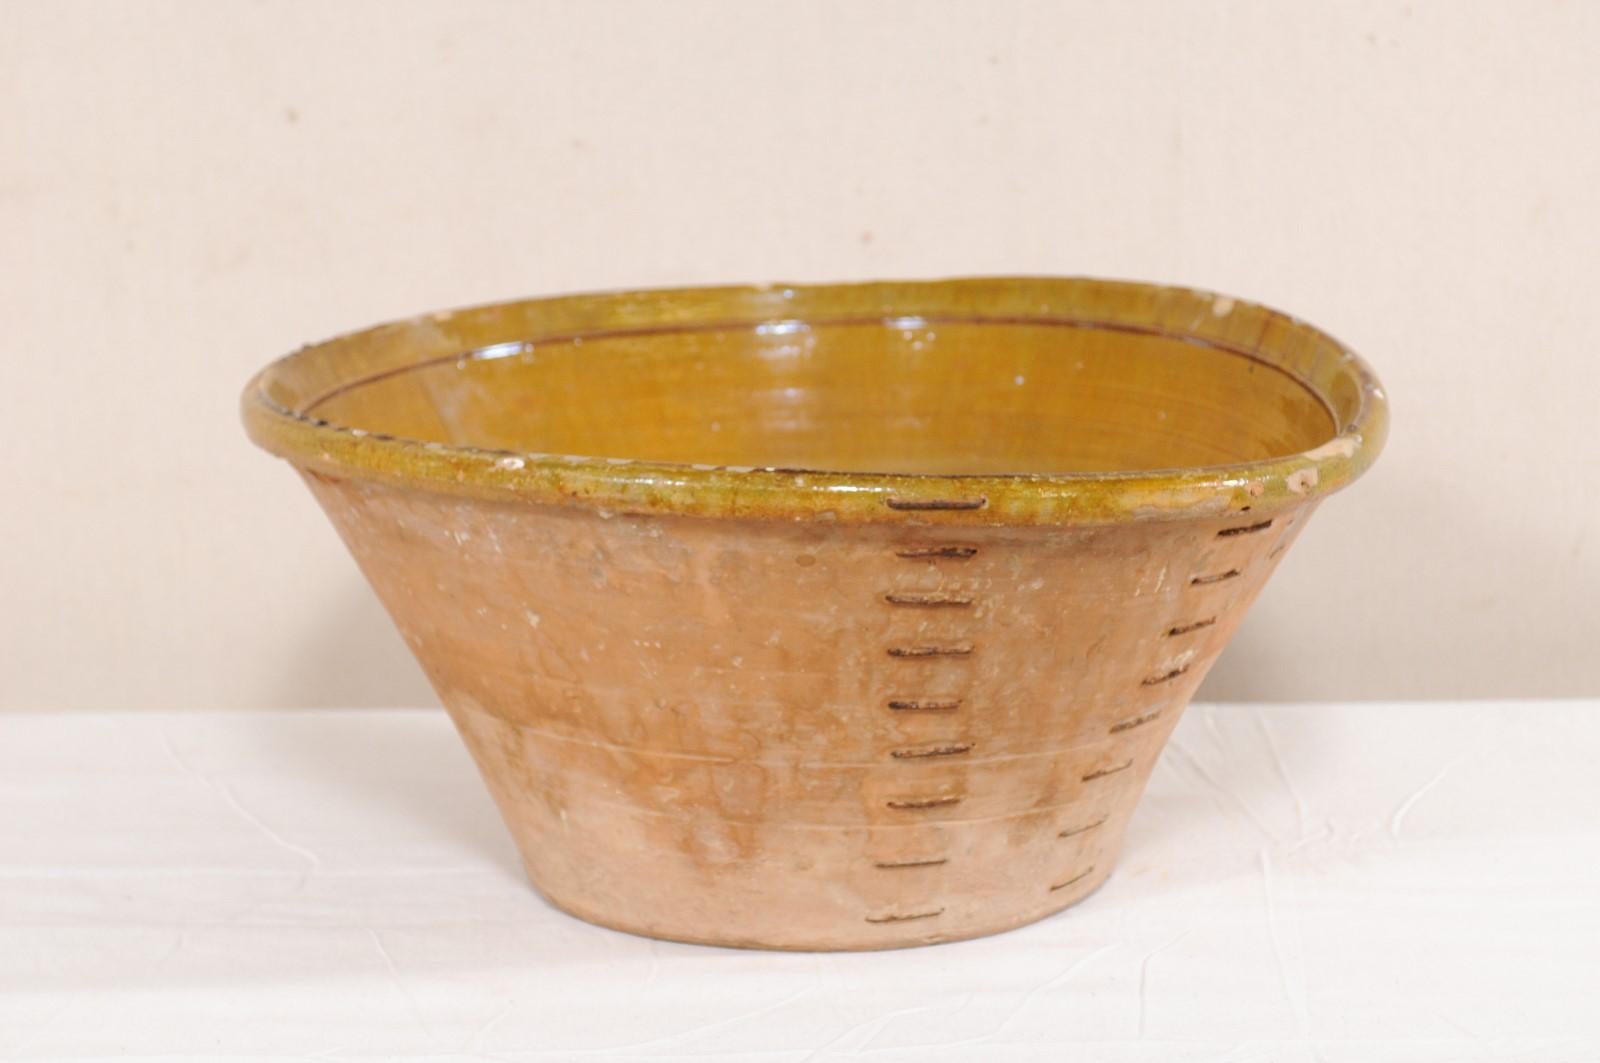 A Spanish terracotta bowl with muted yellow and pale green hues from the early to mid-20th century. This bowl from Spain is round in shape, with widest part being at the top lip, it gradually tapers towards the bottom, and rests upon a flat base.